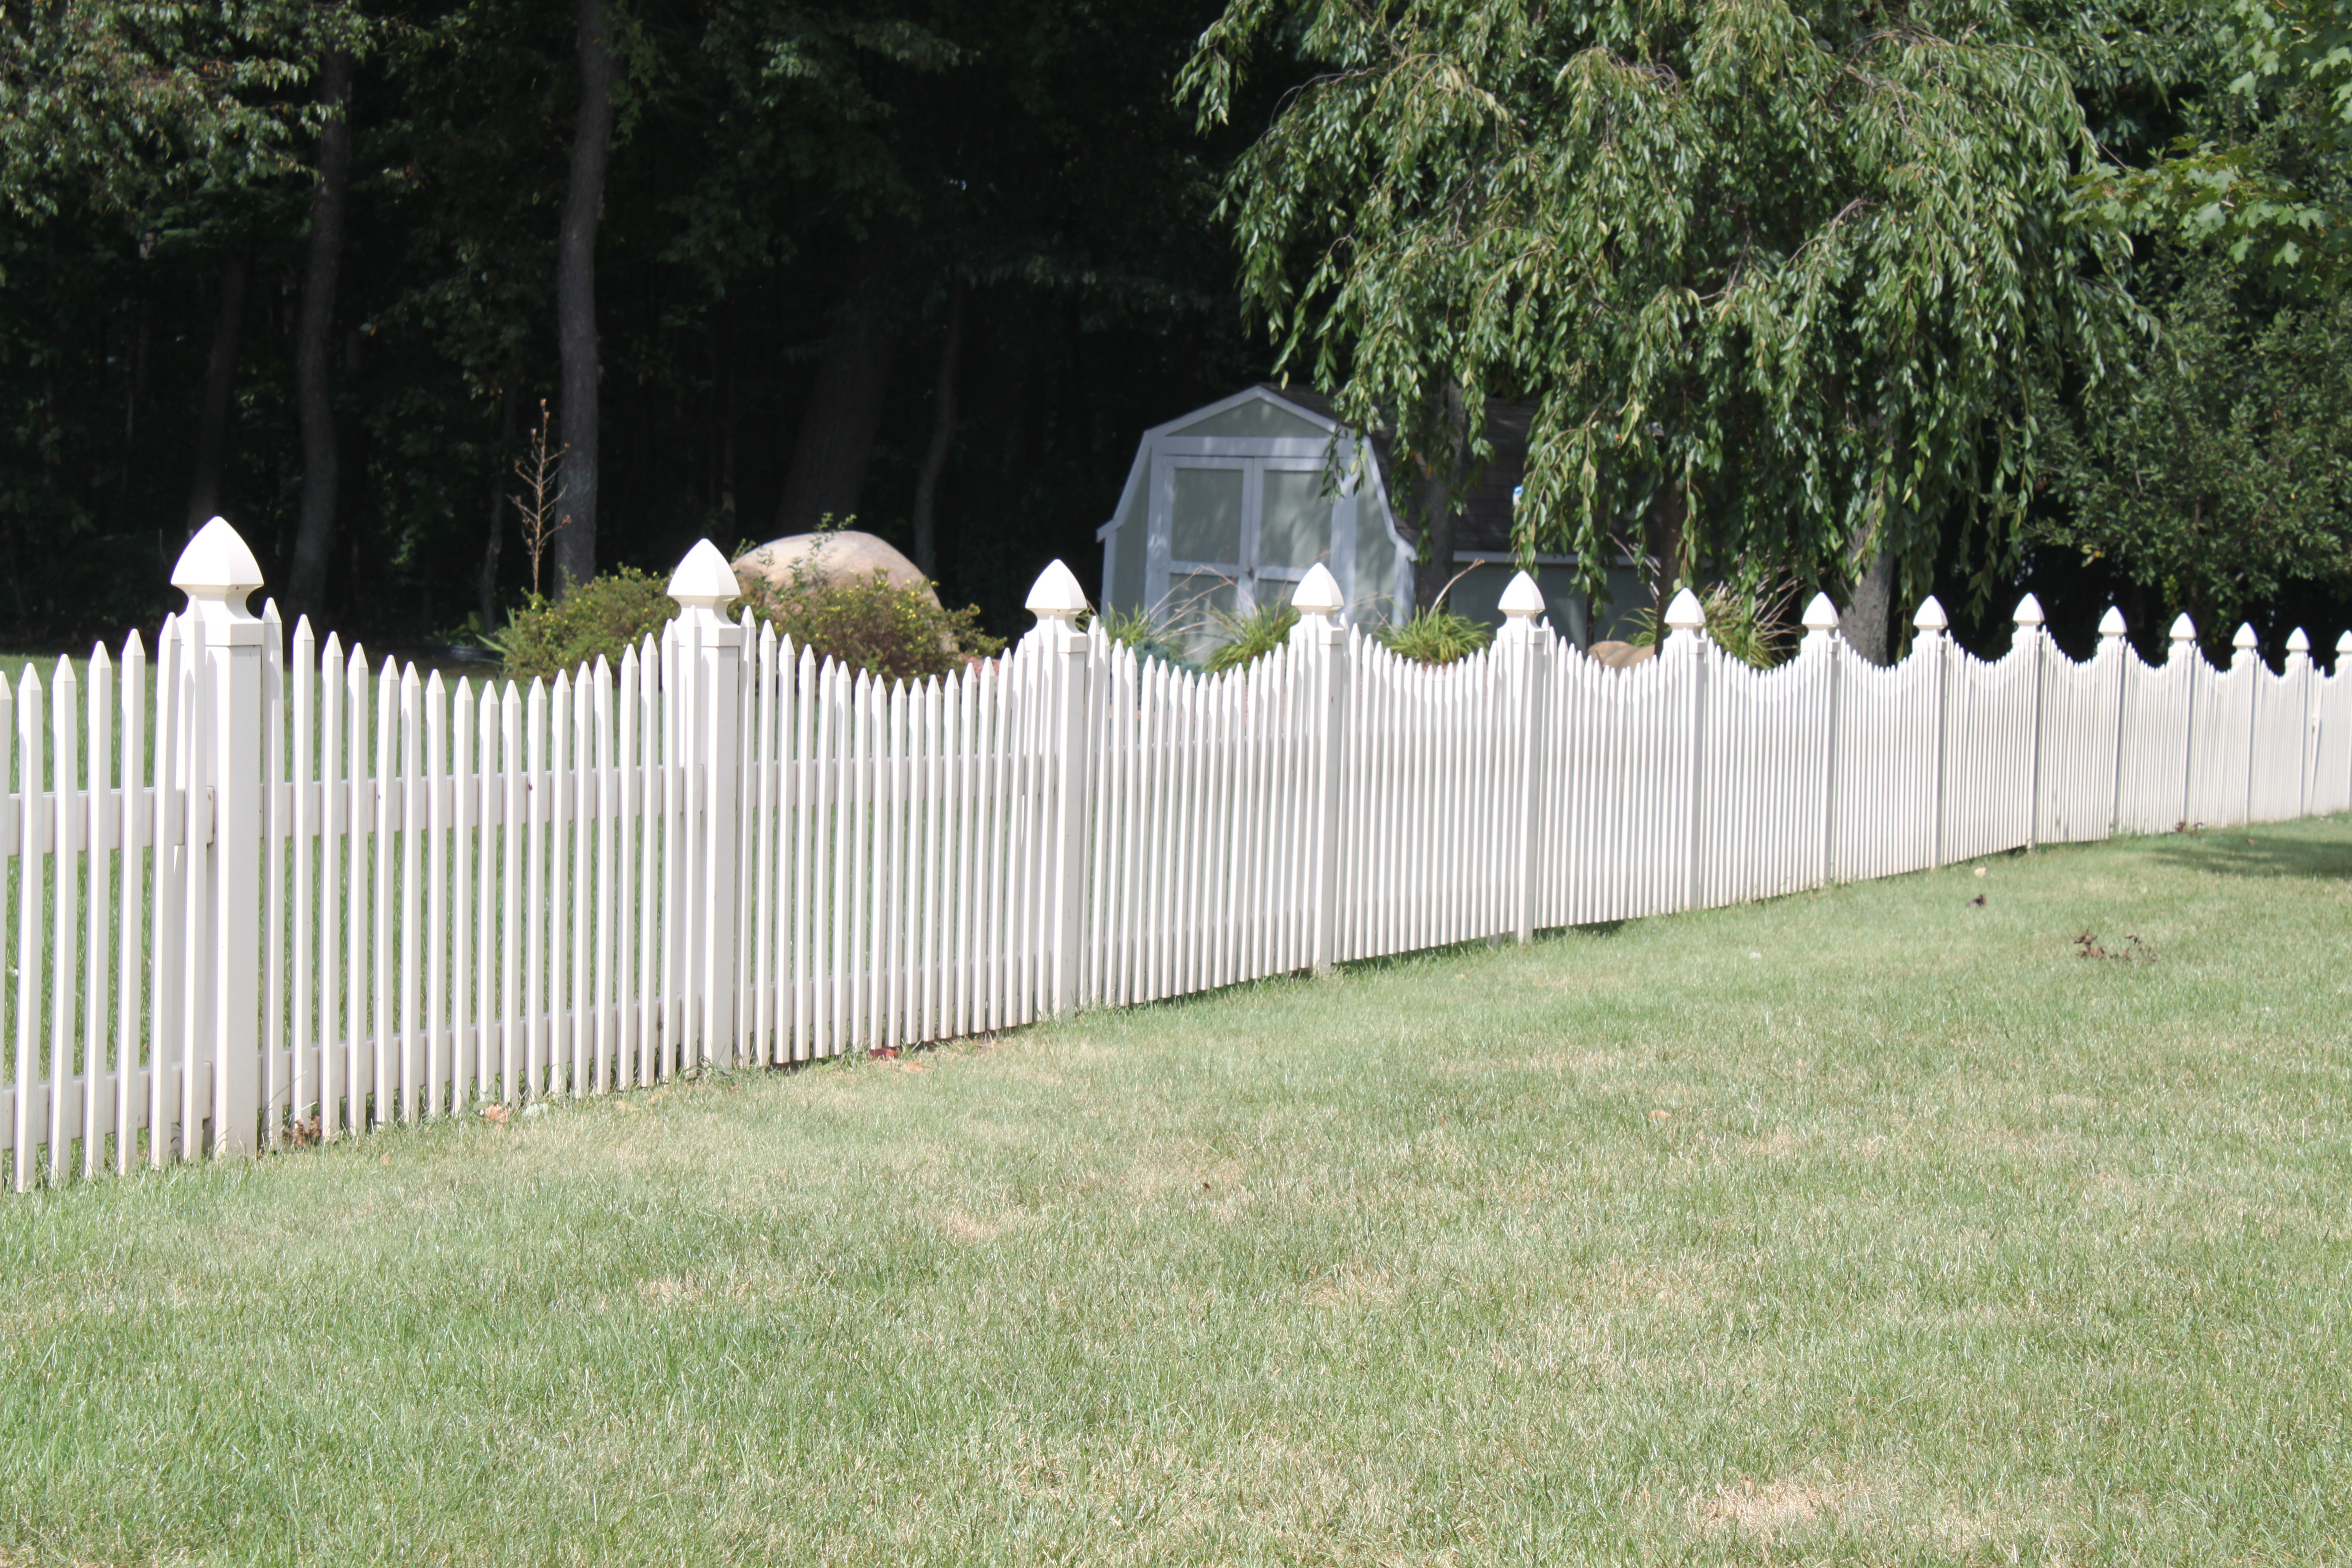 Picket Fence Vinyl Fence In A Variety Of Colors And Styles pertaining to dimensions 4752 X 3168